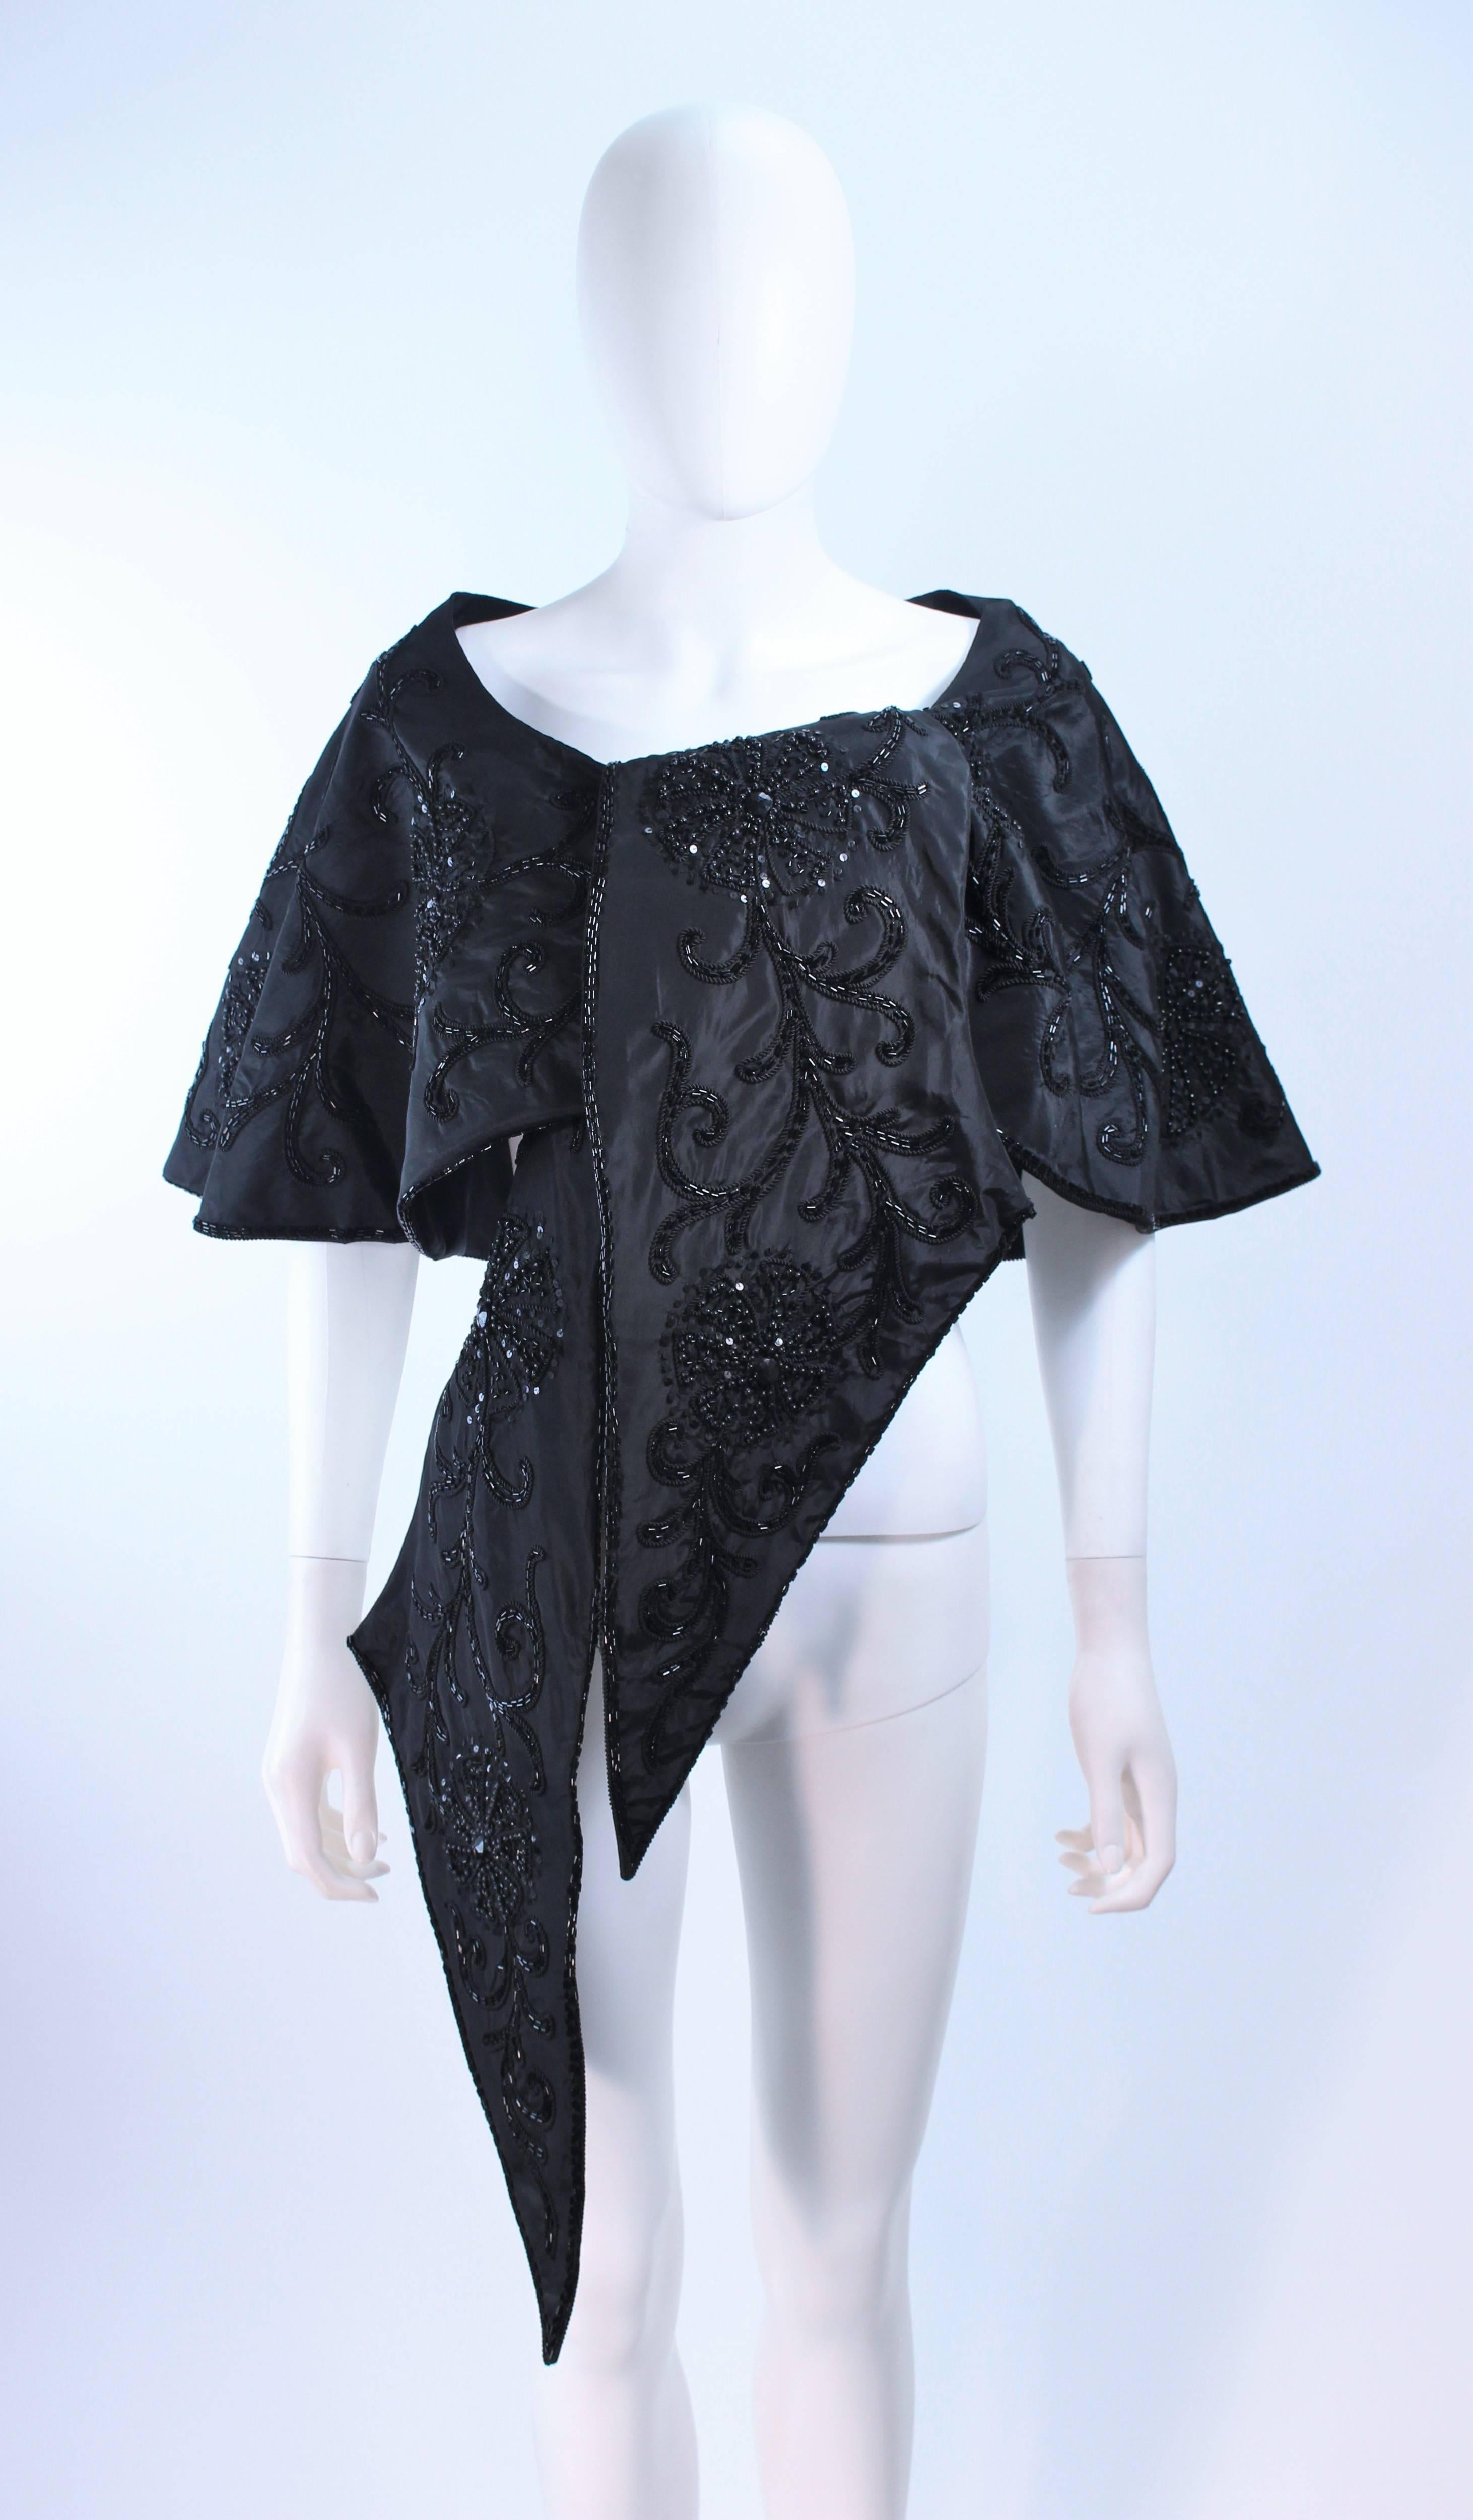 This wrap is composed of a black hand beaded silk. This versatile wrap can be worn in a variety of fashions. In excellent vintage condition.

**Please cross-reference measurements for personal accuracy. 

Measures (Approximately)
Length: